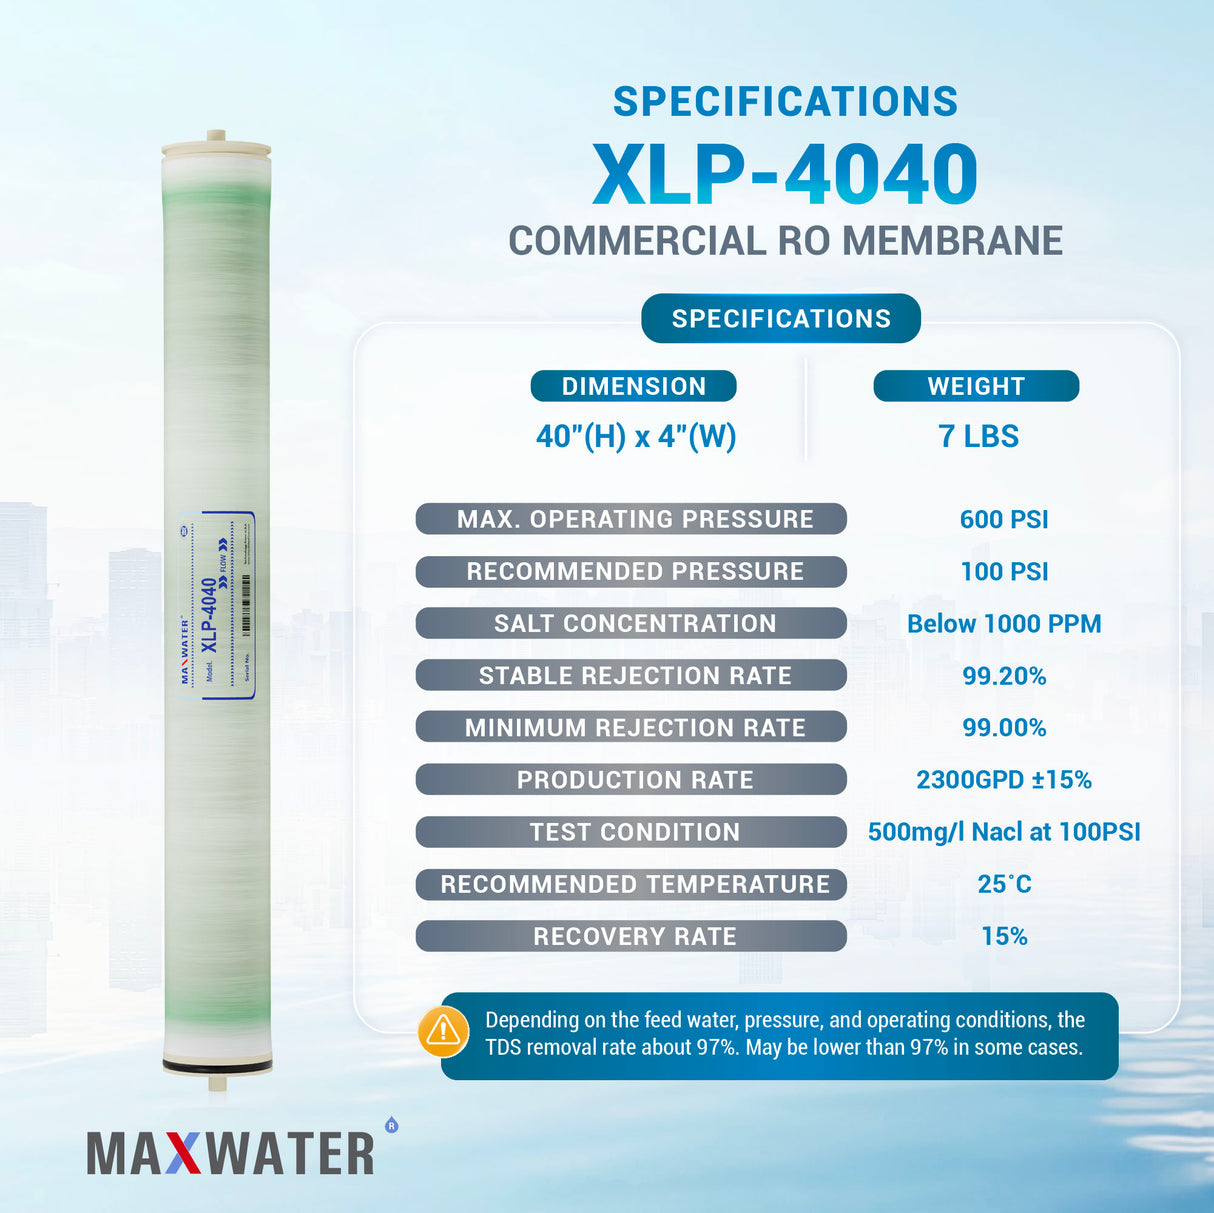 Efficient 4x40-inch RO membrane designed for extra low-pressure applications - advanced XLP variant.